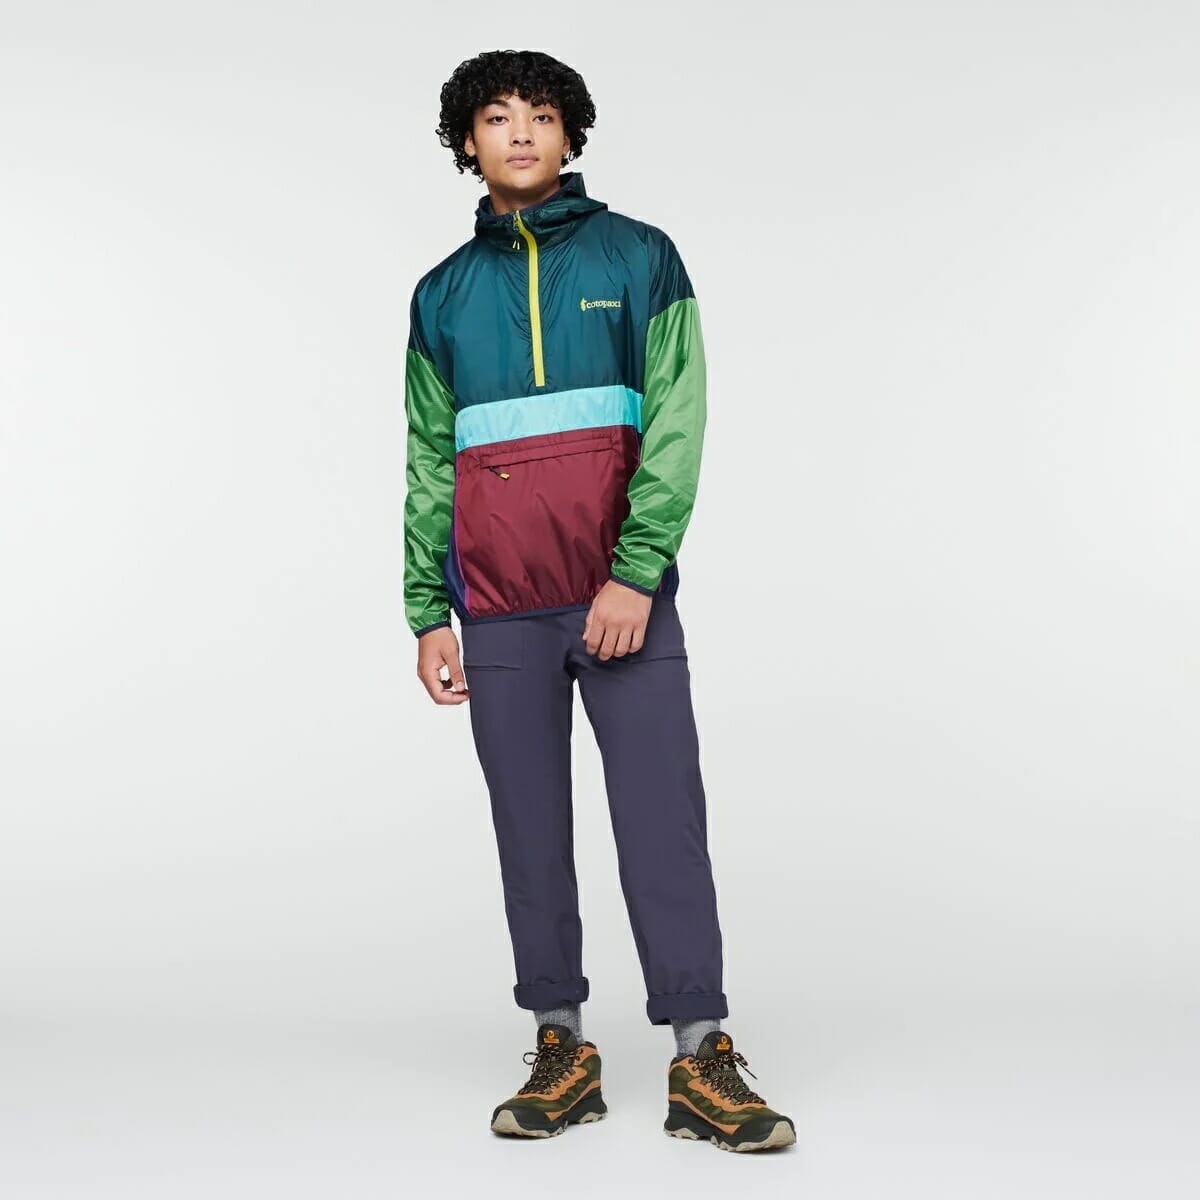 Colorful-eco-outerwear-outdoor-apparel